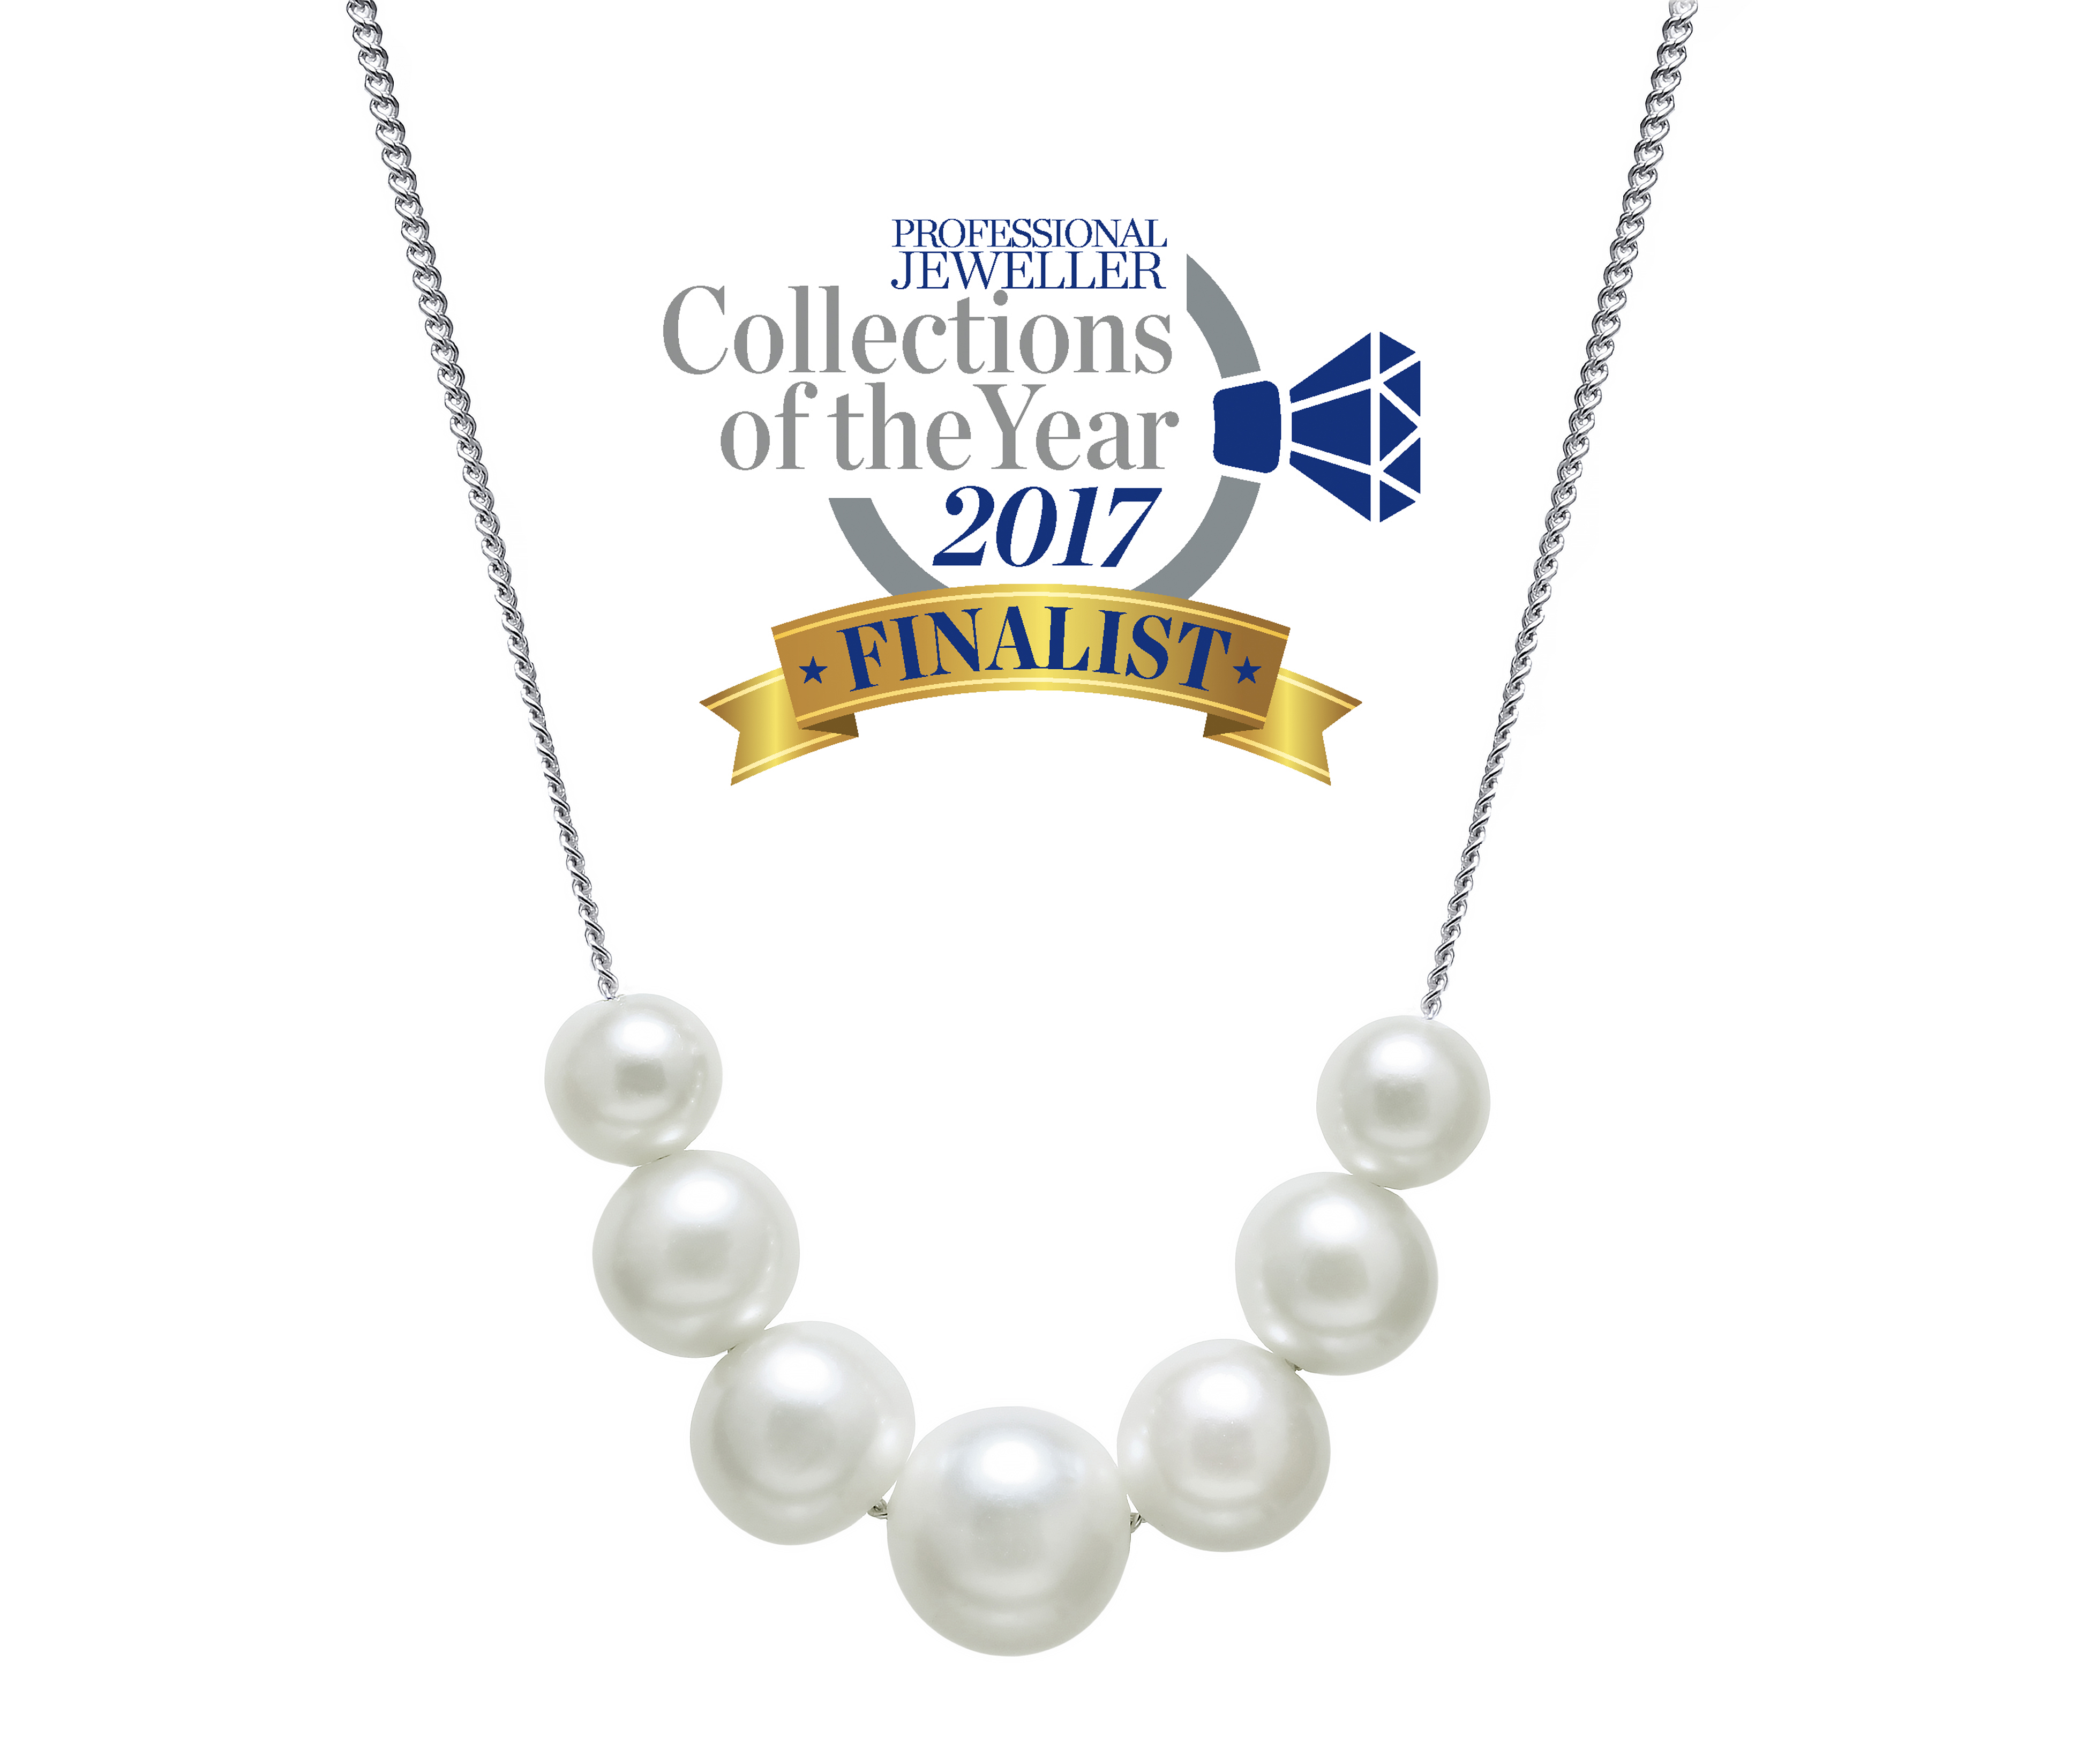 Pearl Jewellery Collection Shortlisted for Professional Jewellers’ latest awards